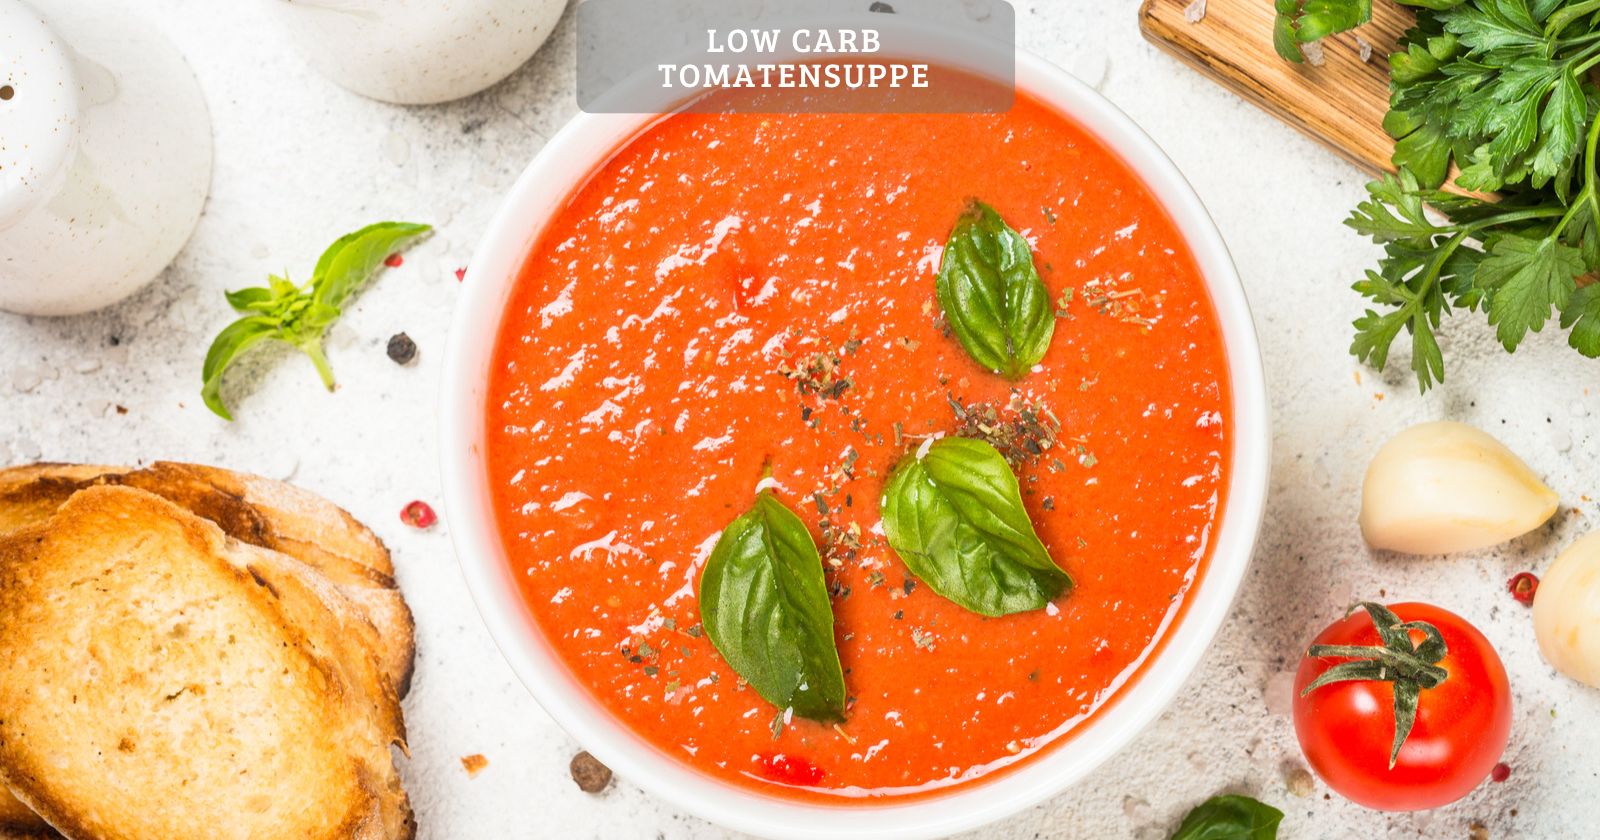 Low carb tomatensuppe